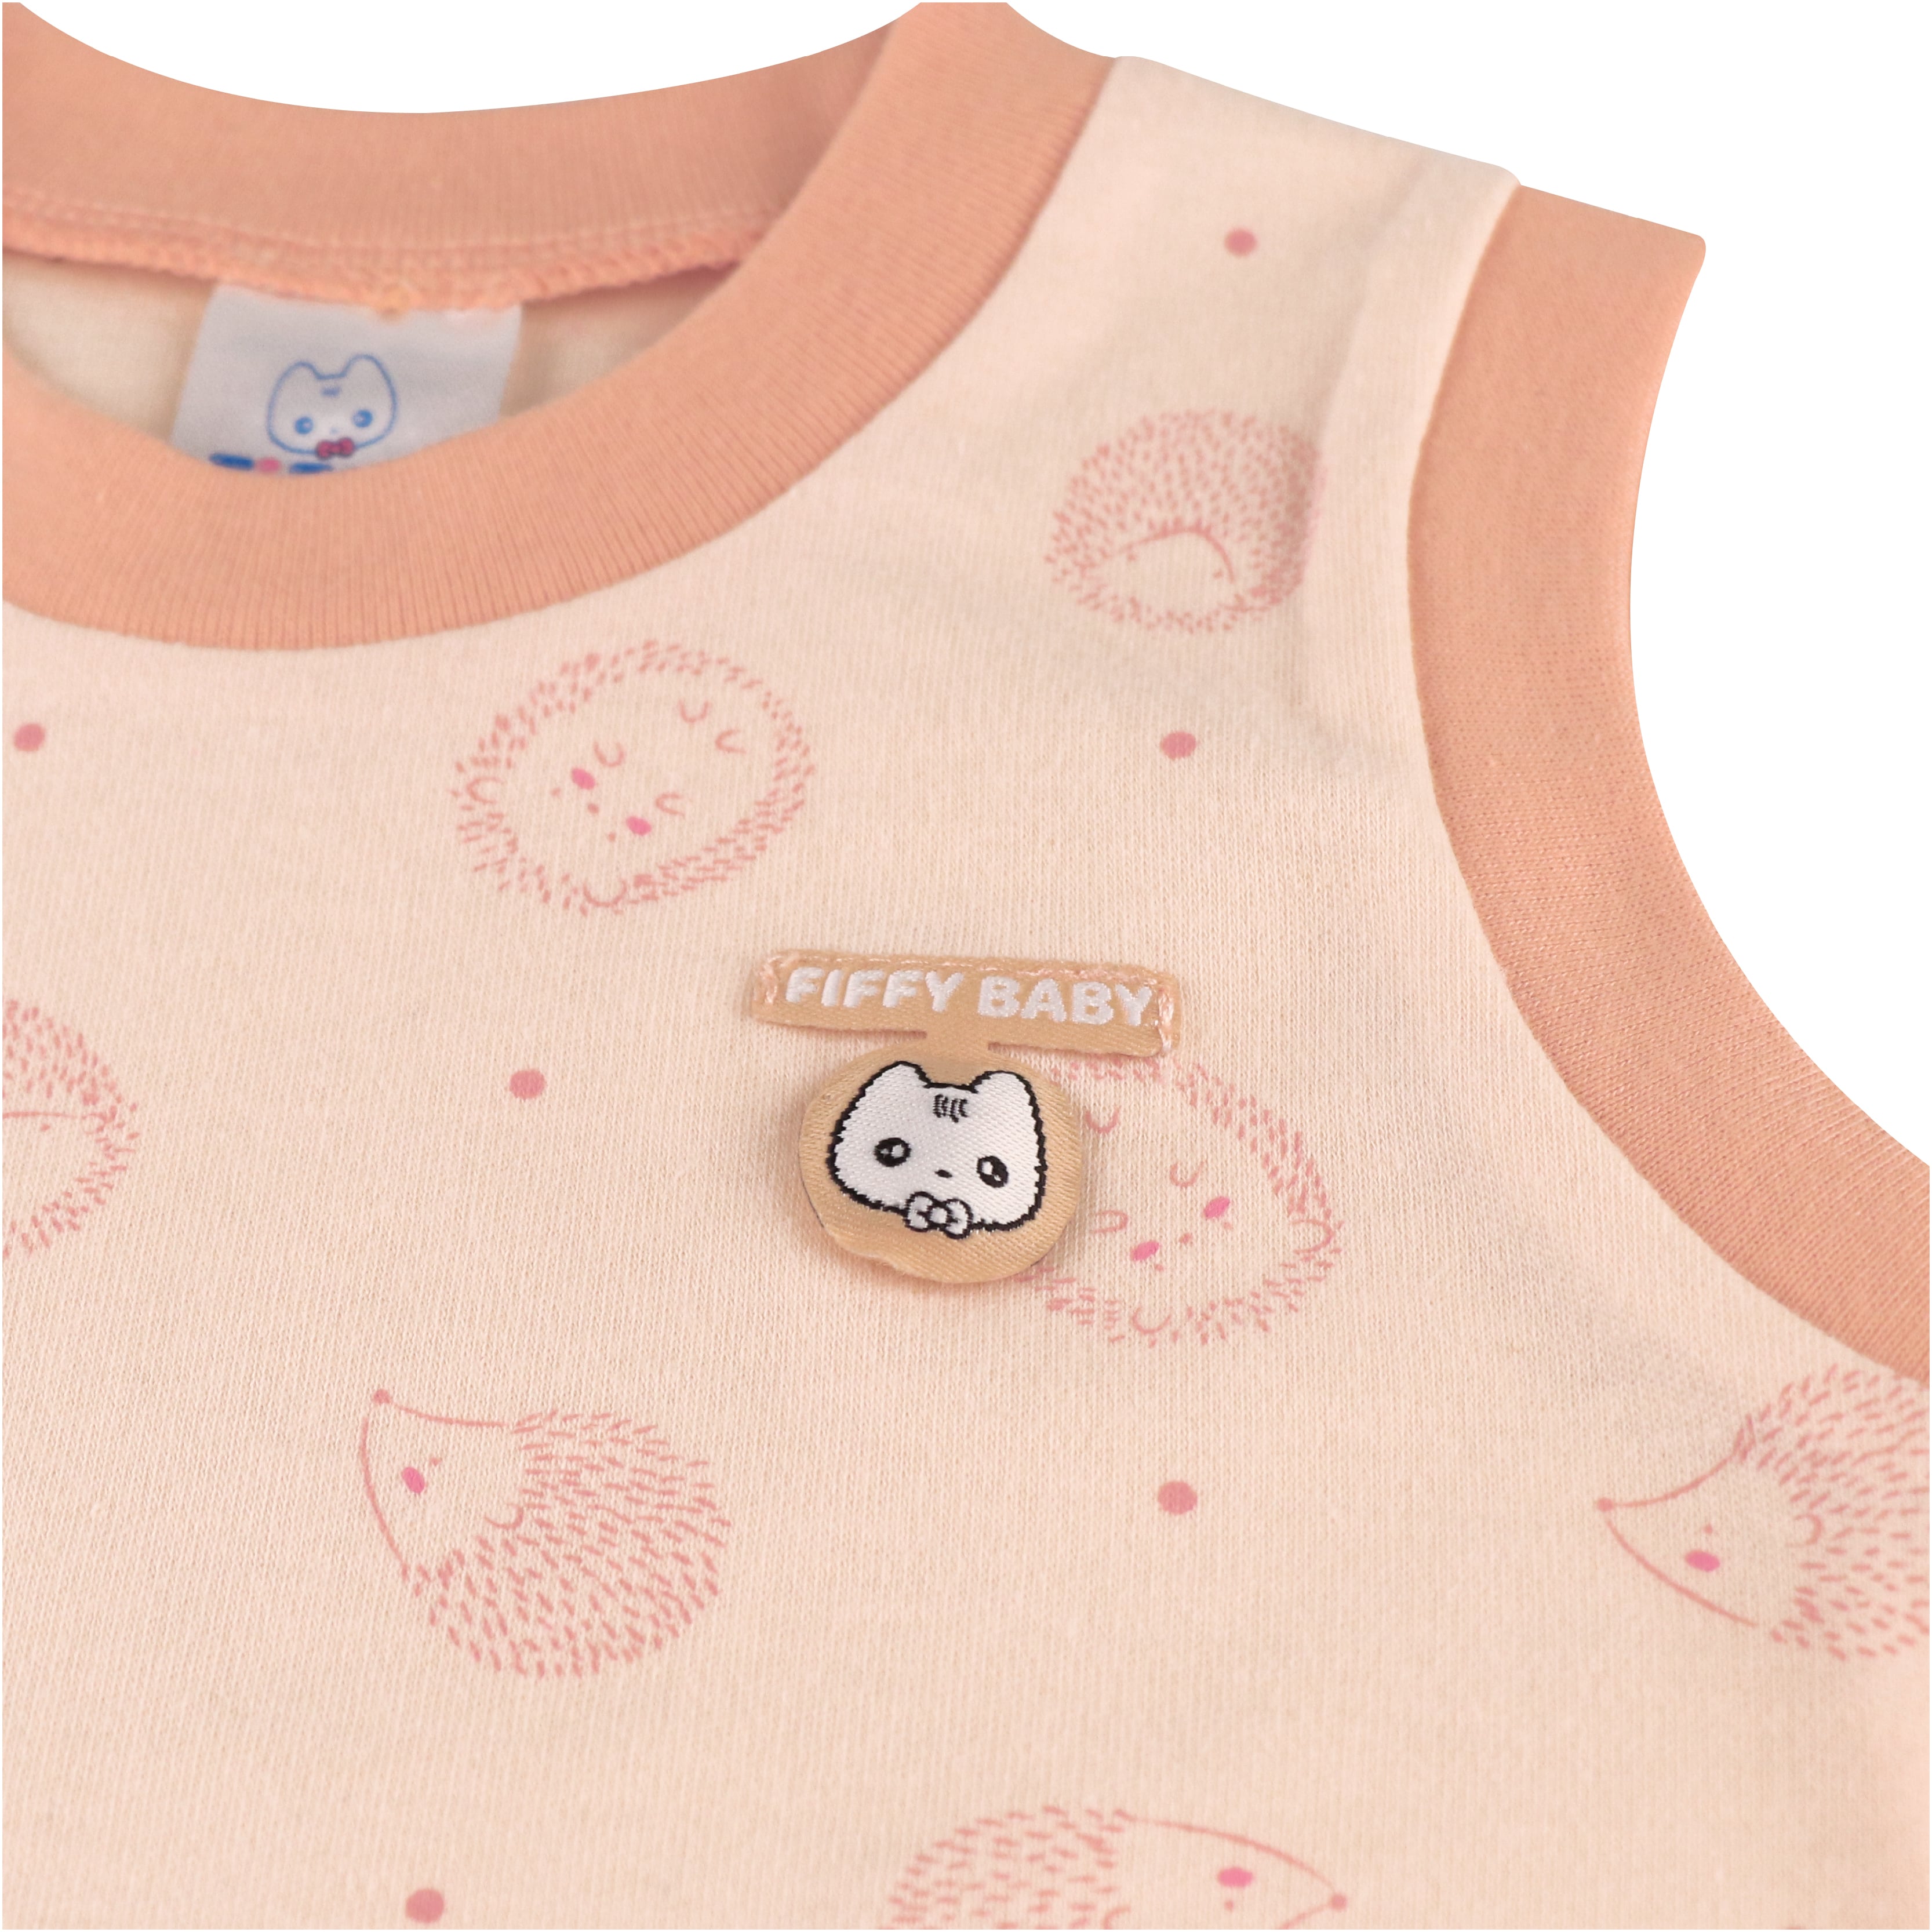 FIFFY PINKY HEDGEDOG TANK TOP SUIT